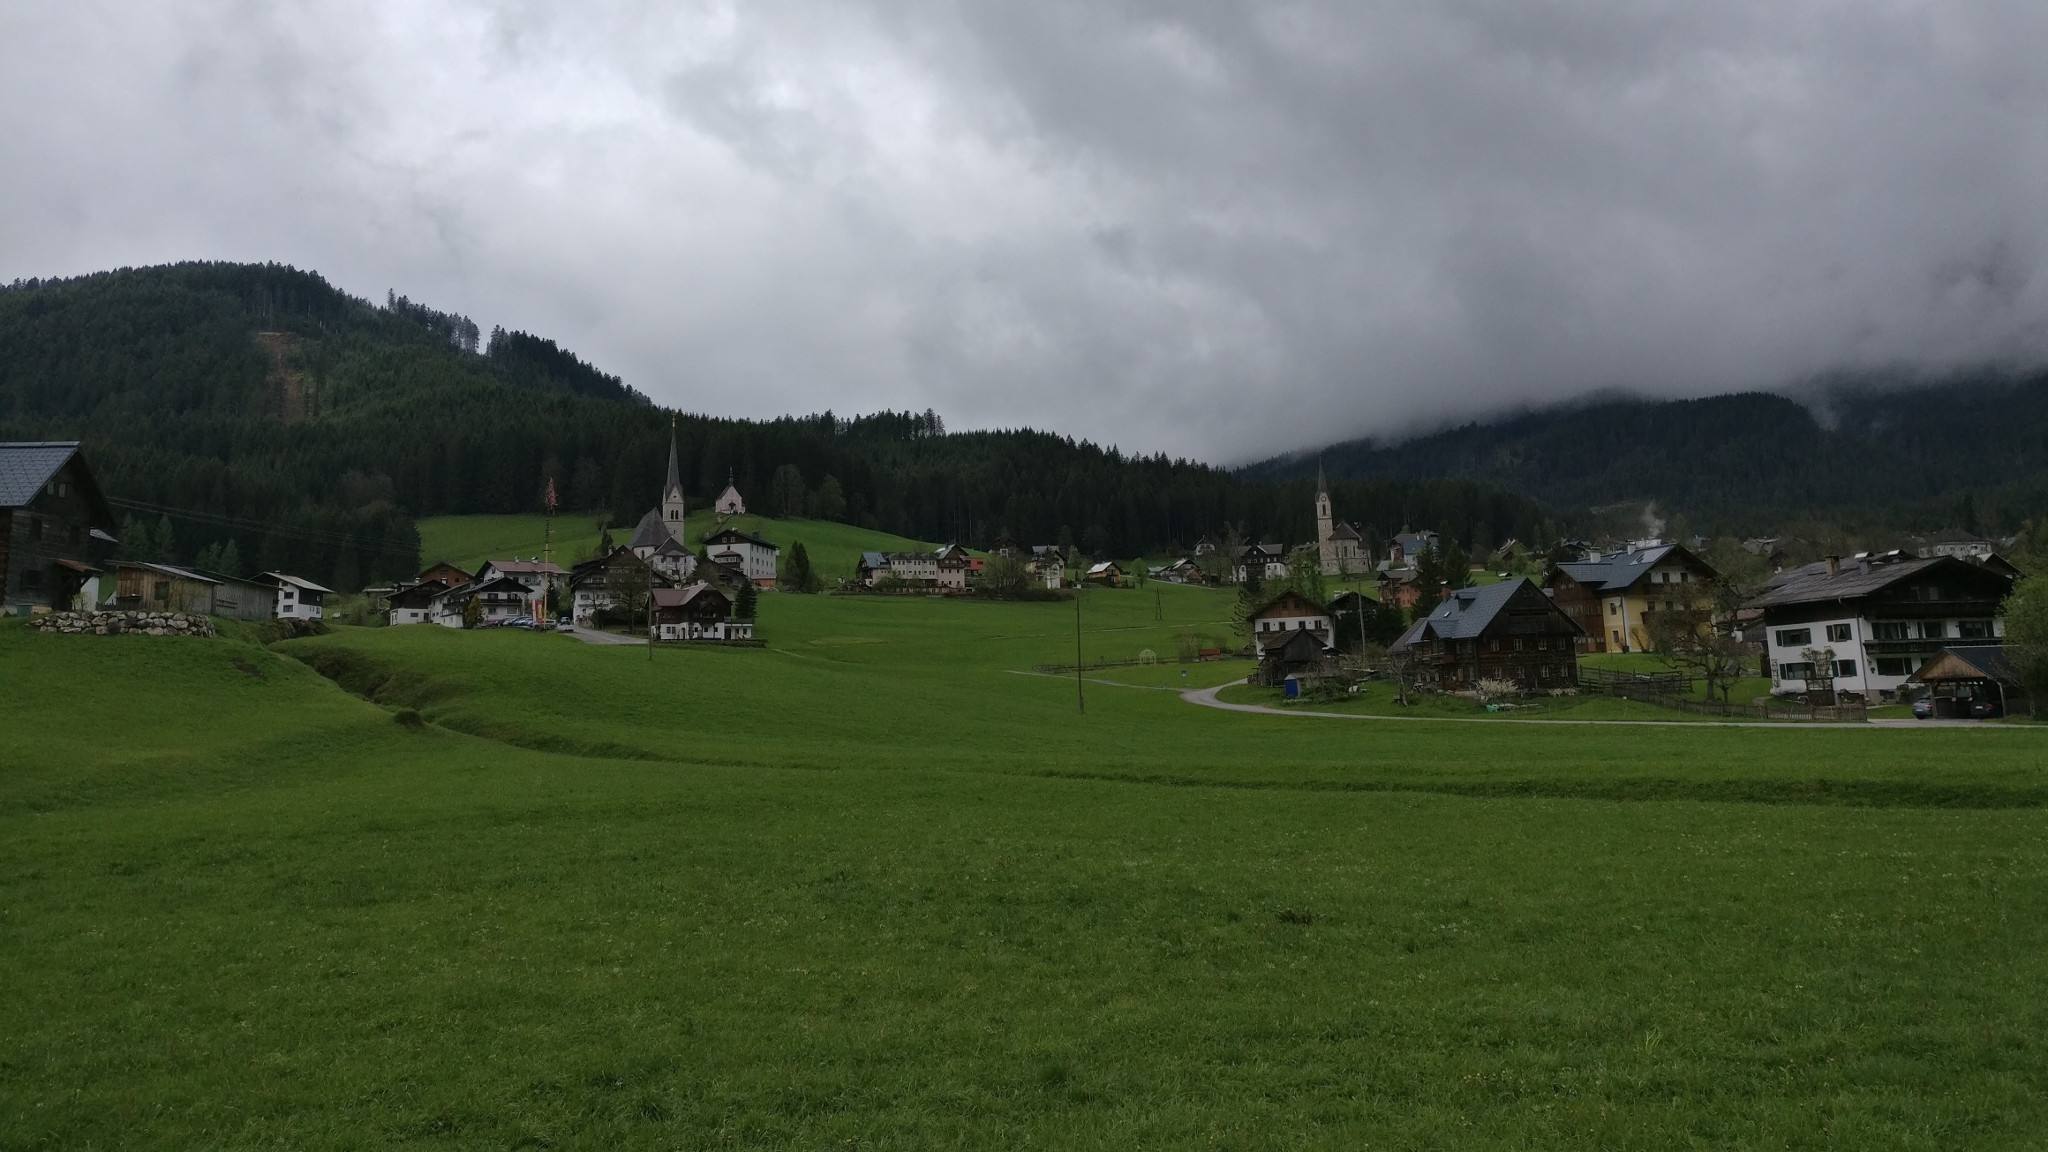 The catholic and evangelist churches, disputing the valley in Gosau